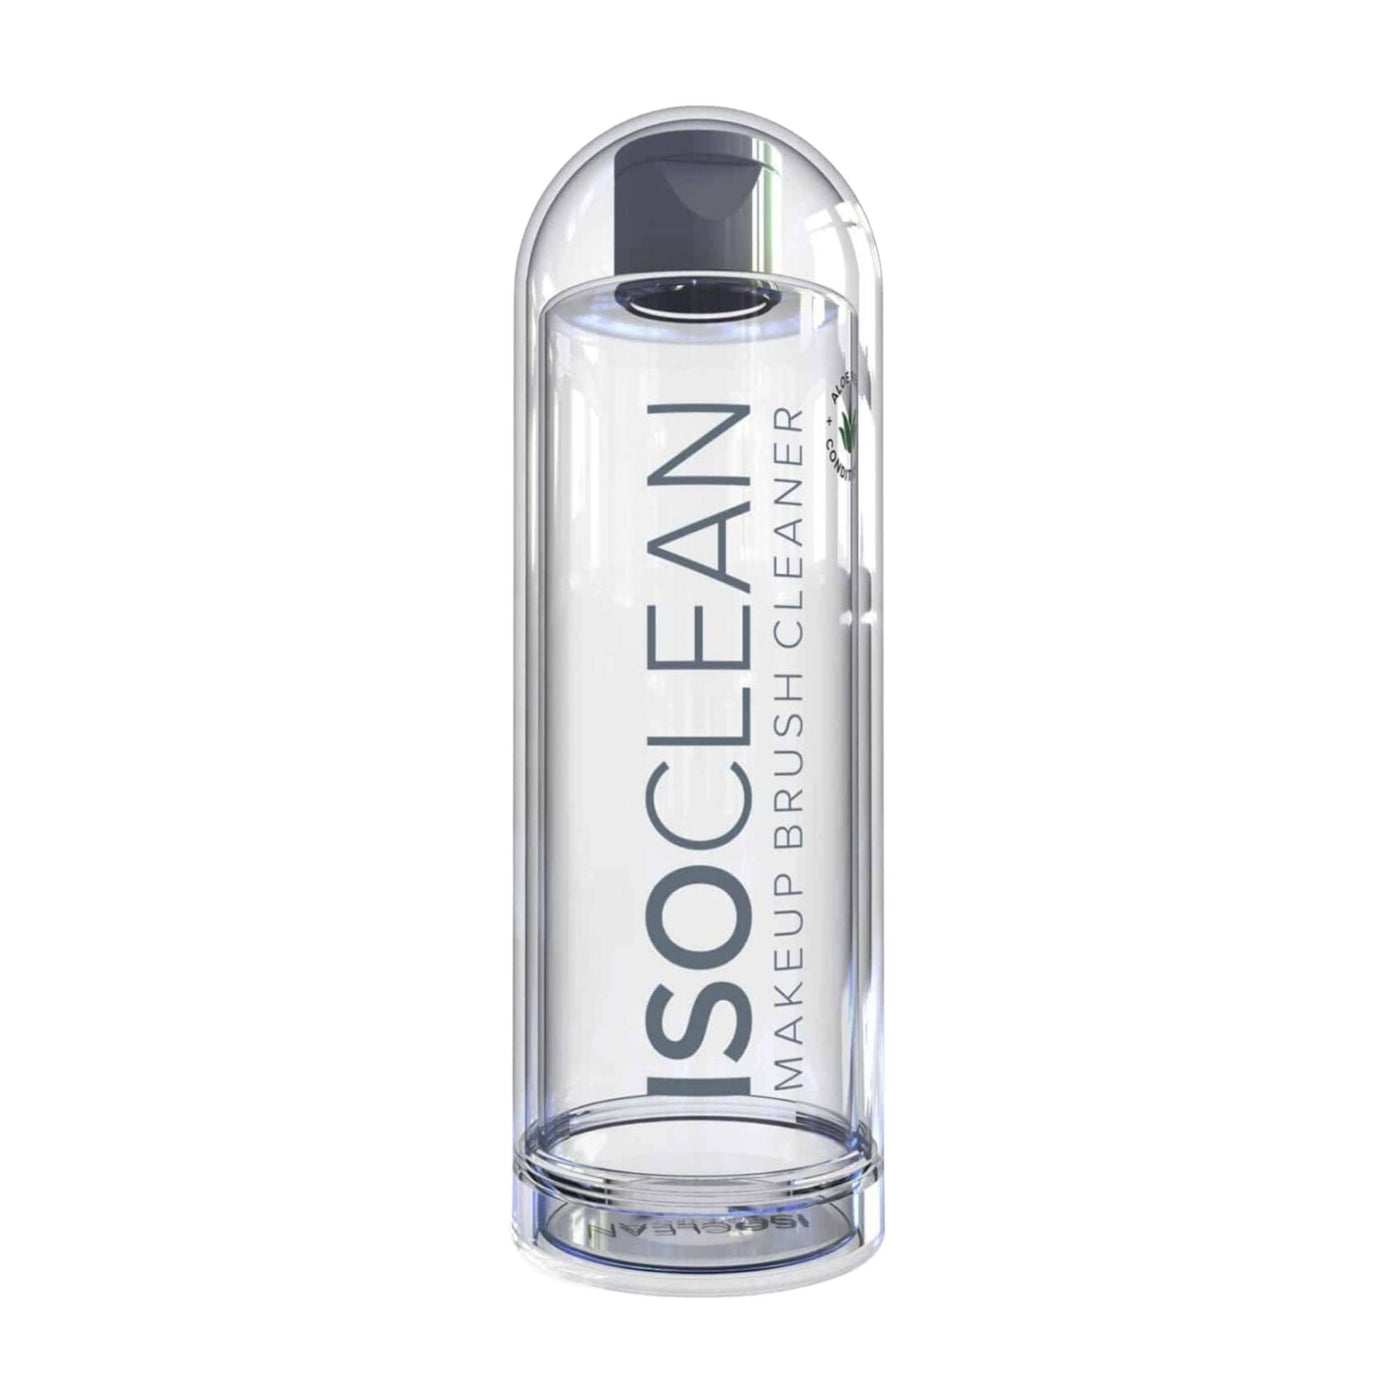 ISOCLEAN - Makeup Brush Cleaner with Dip Tray - 165ml